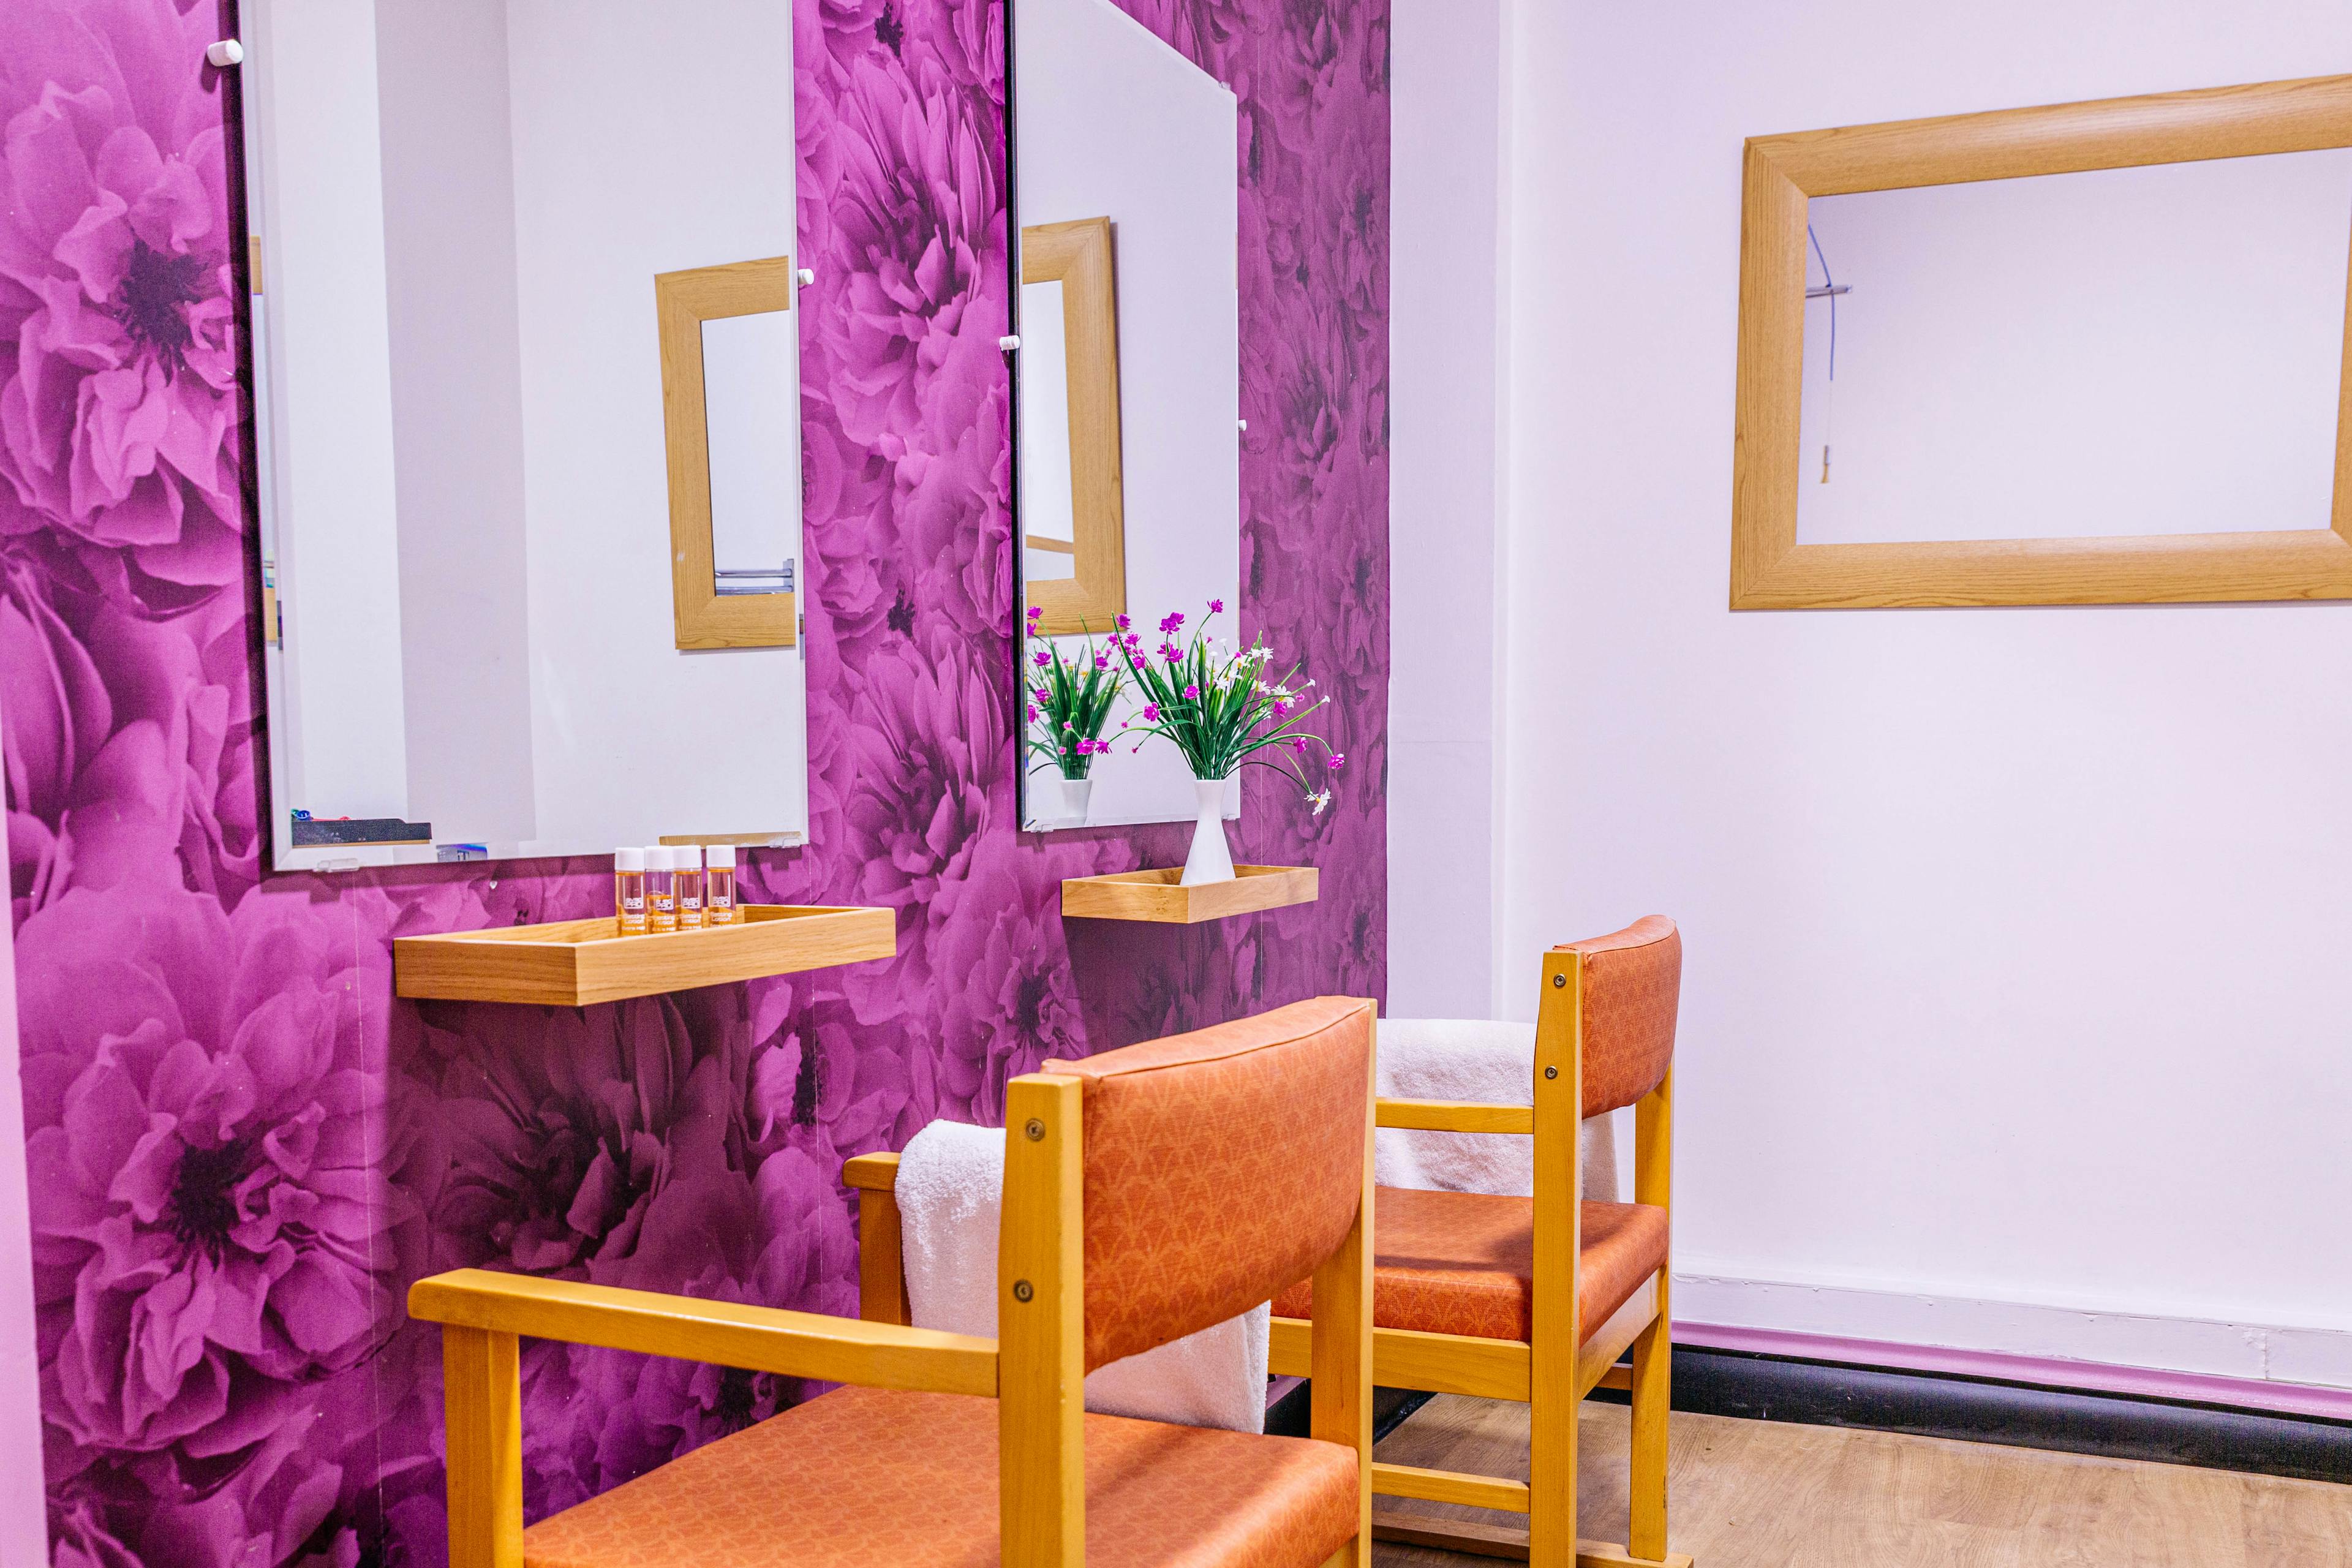 Salon of Kingswood Court Care Home in Bristol, South West England